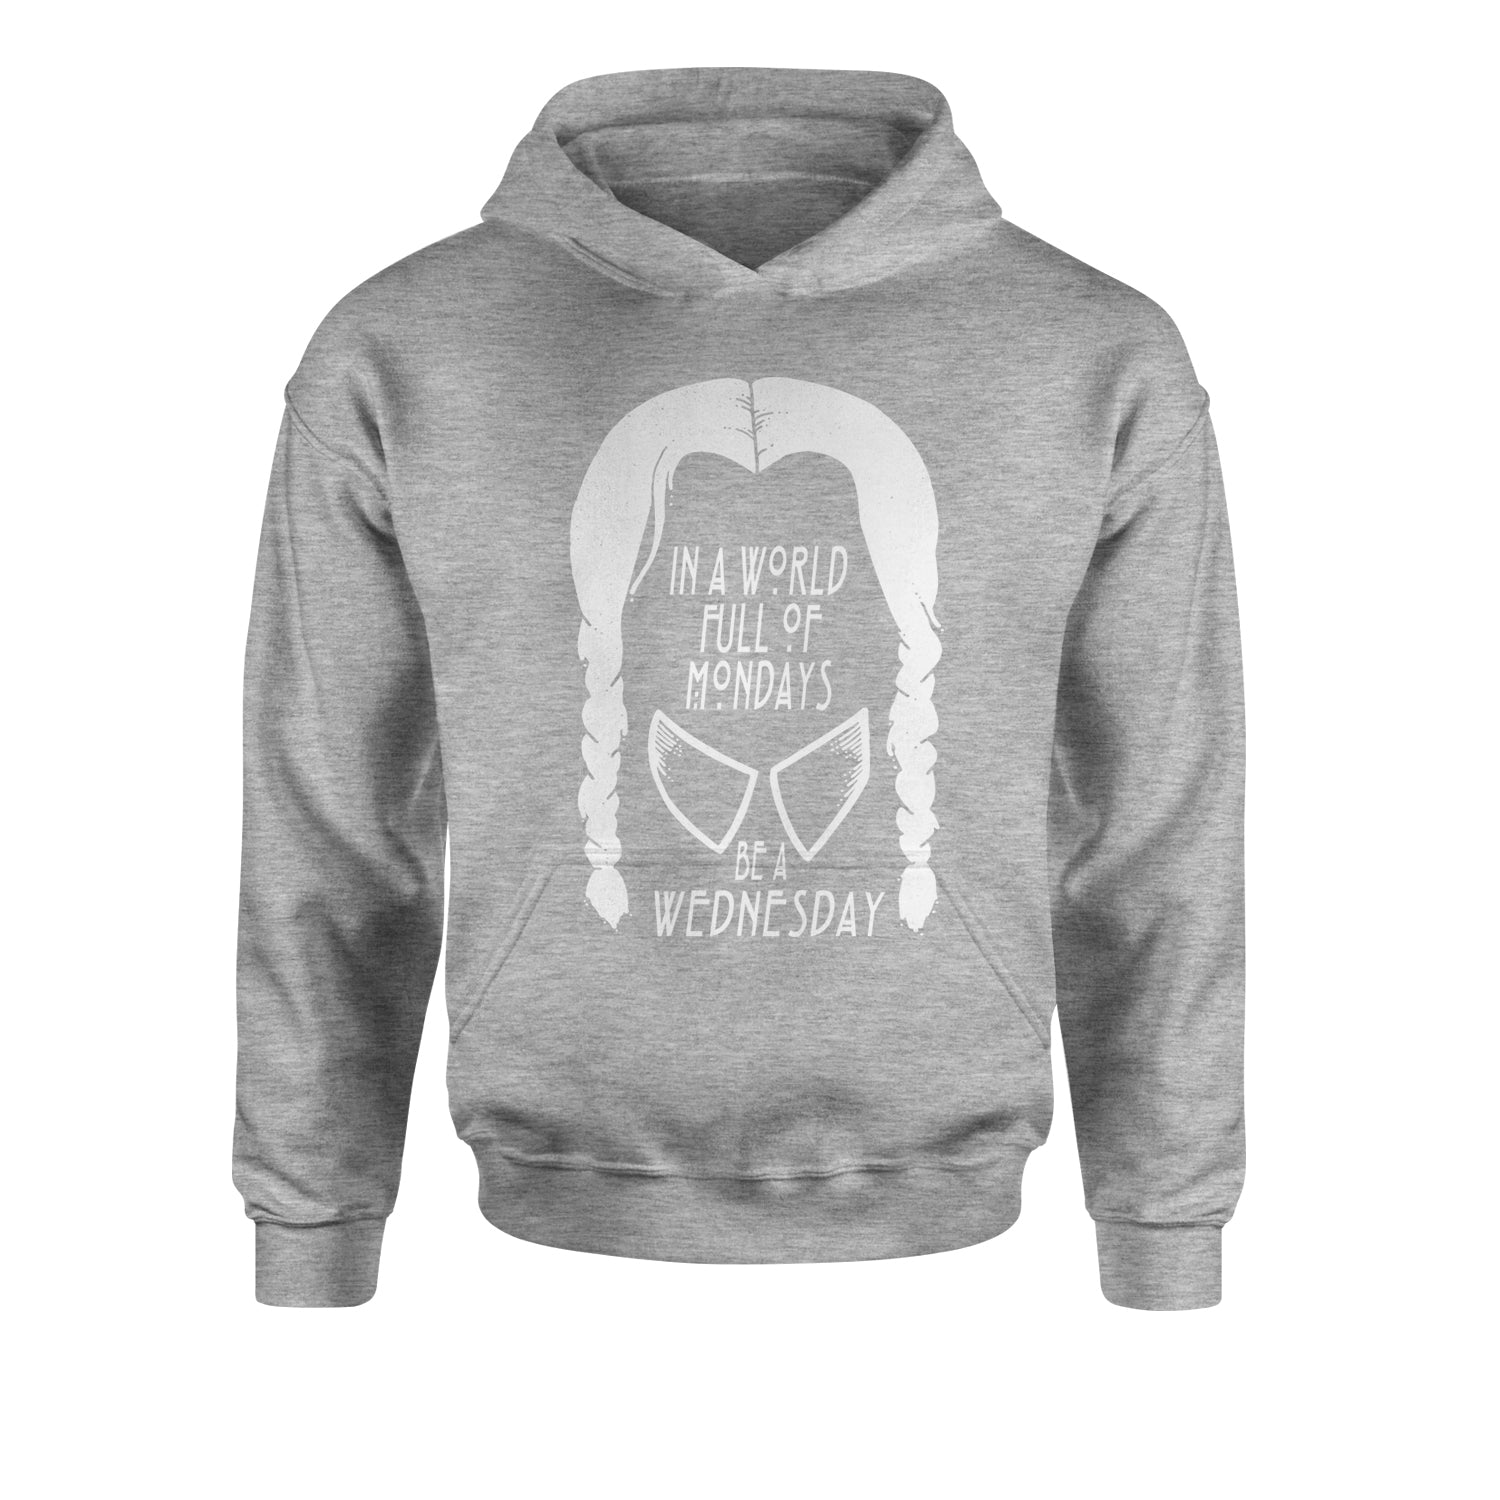 In A World Full Of Mondays, Be A Wednesday Youth-Sized Hoodie academy, jericho, more, never, nevermore, vermont, Wednesday by Expression Tees